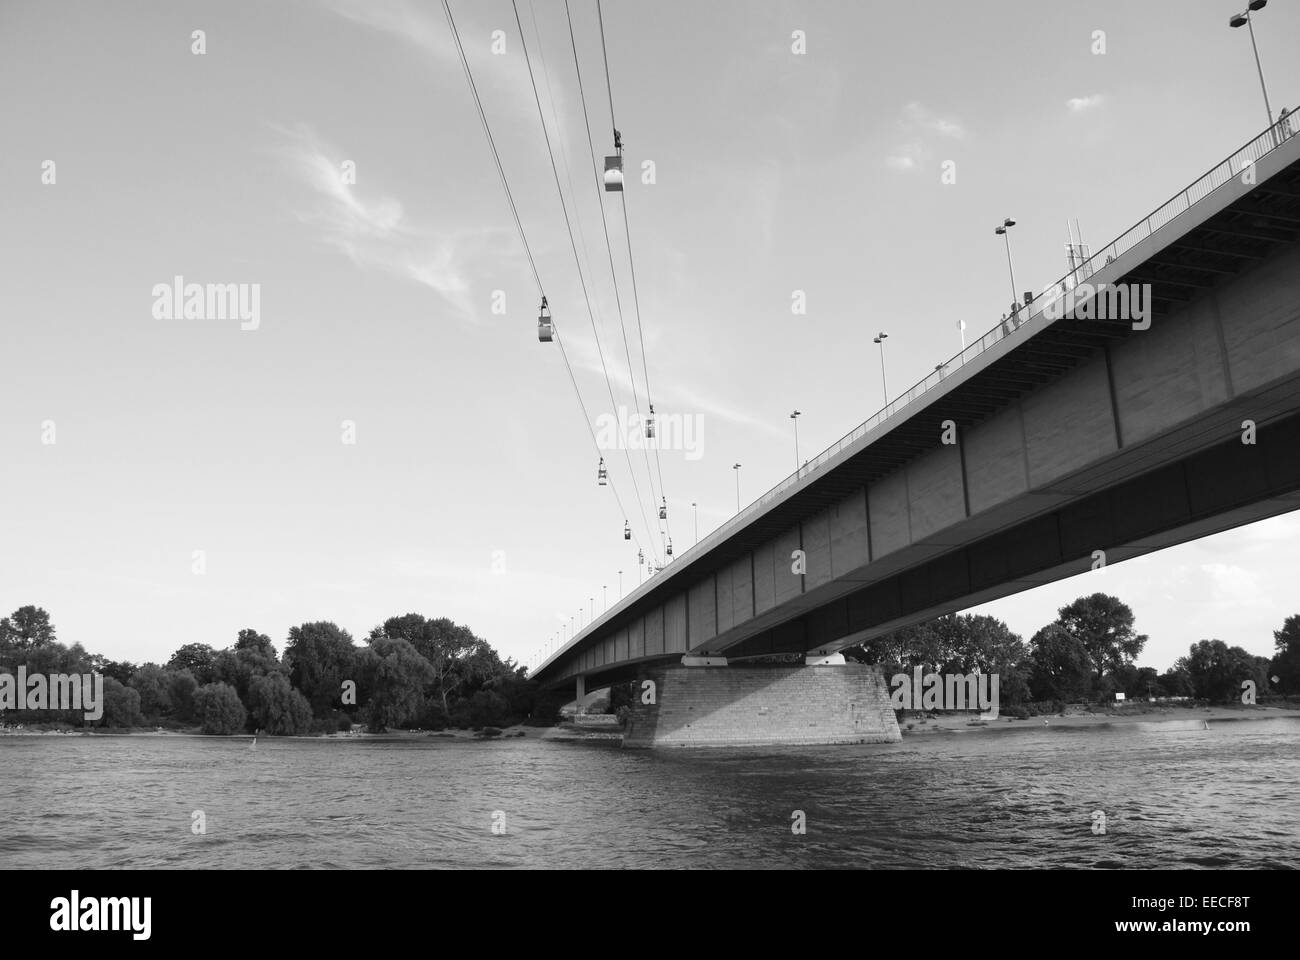 Cable cars cross the Rhine by the Zoobruecke (Zoo Bridge) in Cologne, Germany - monochrome processing Stock Photo